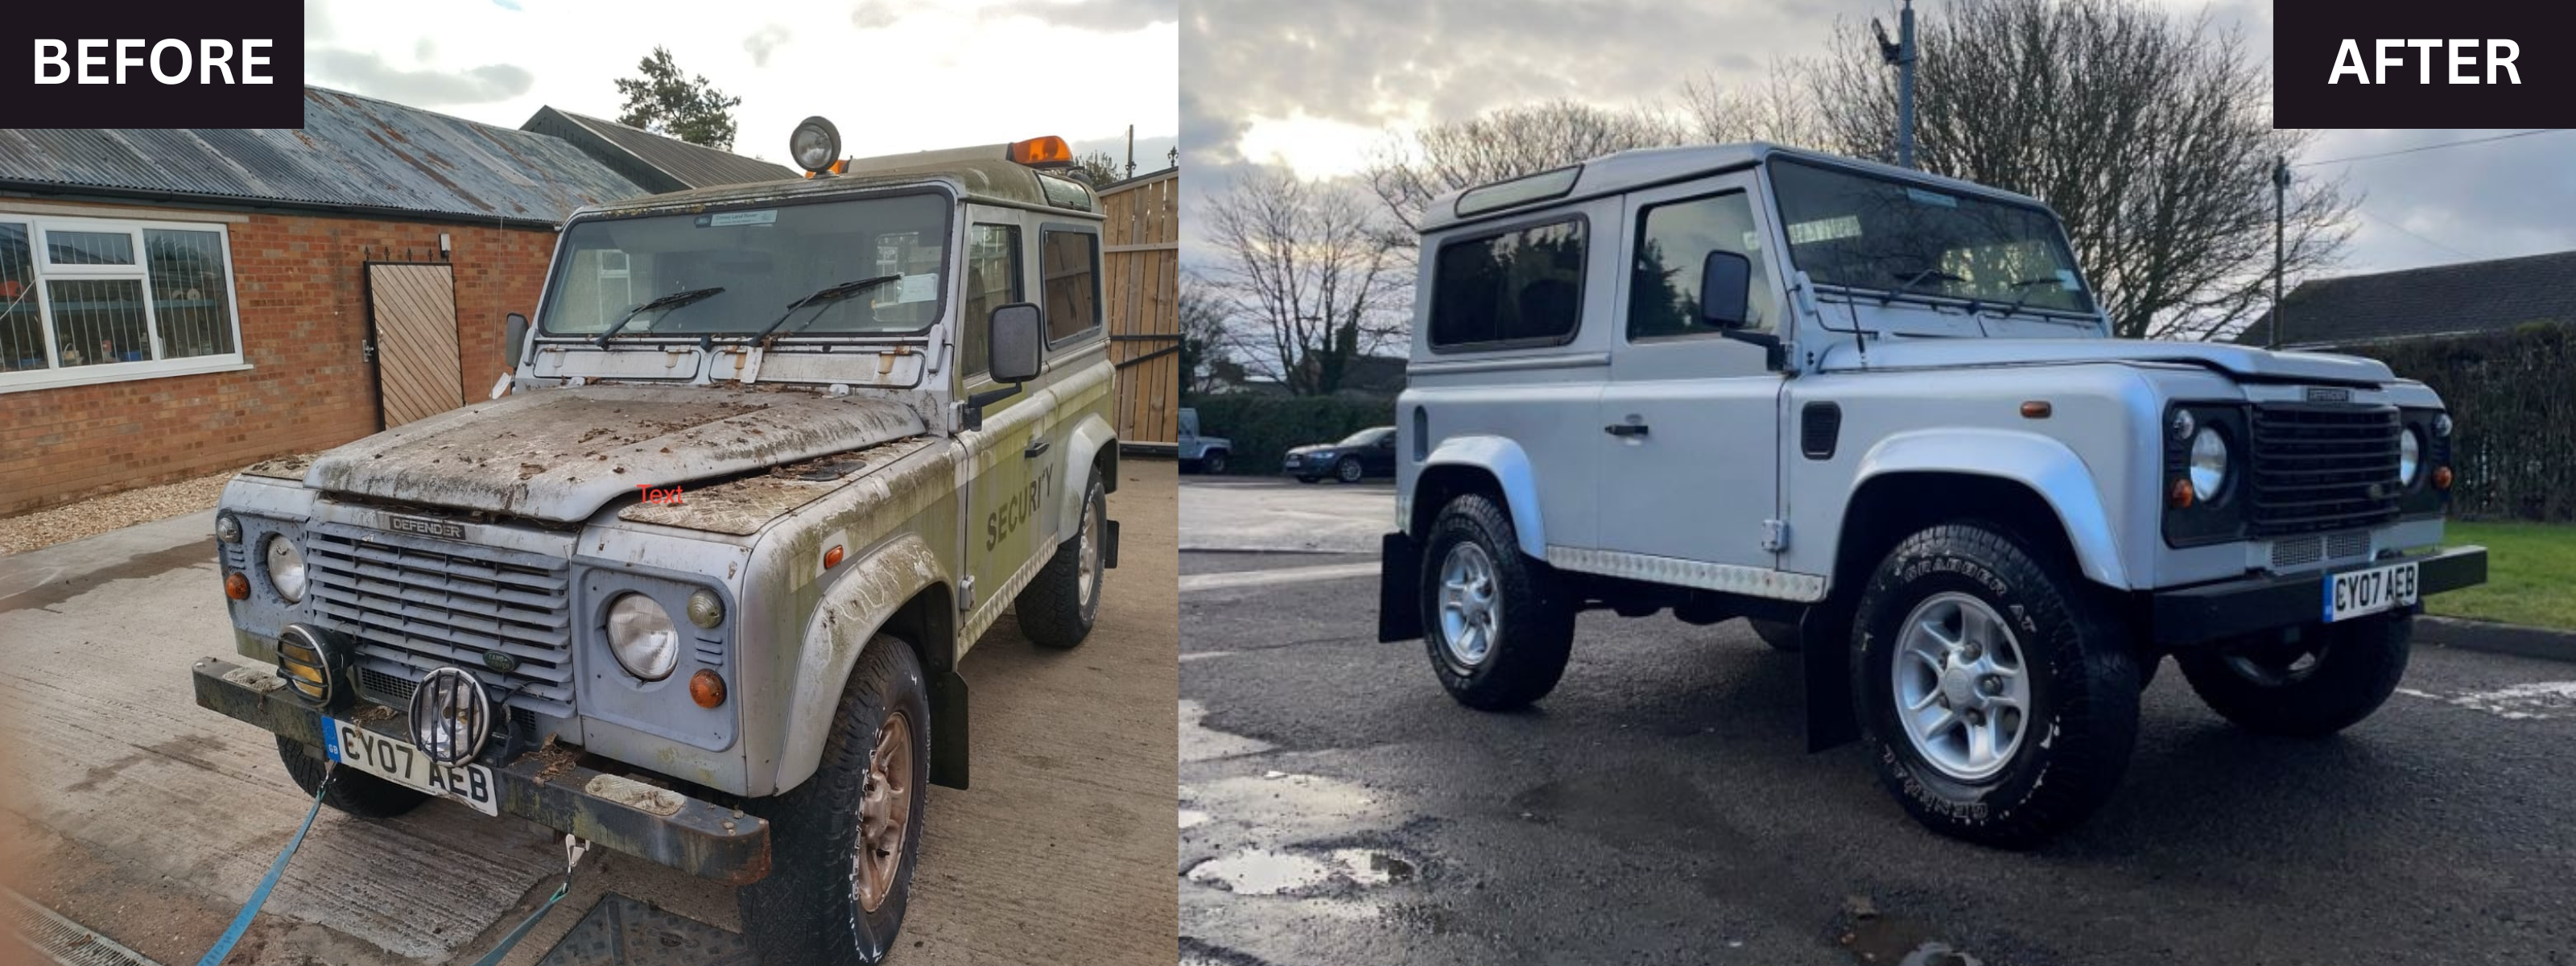 LR BEFORE AND AFTER